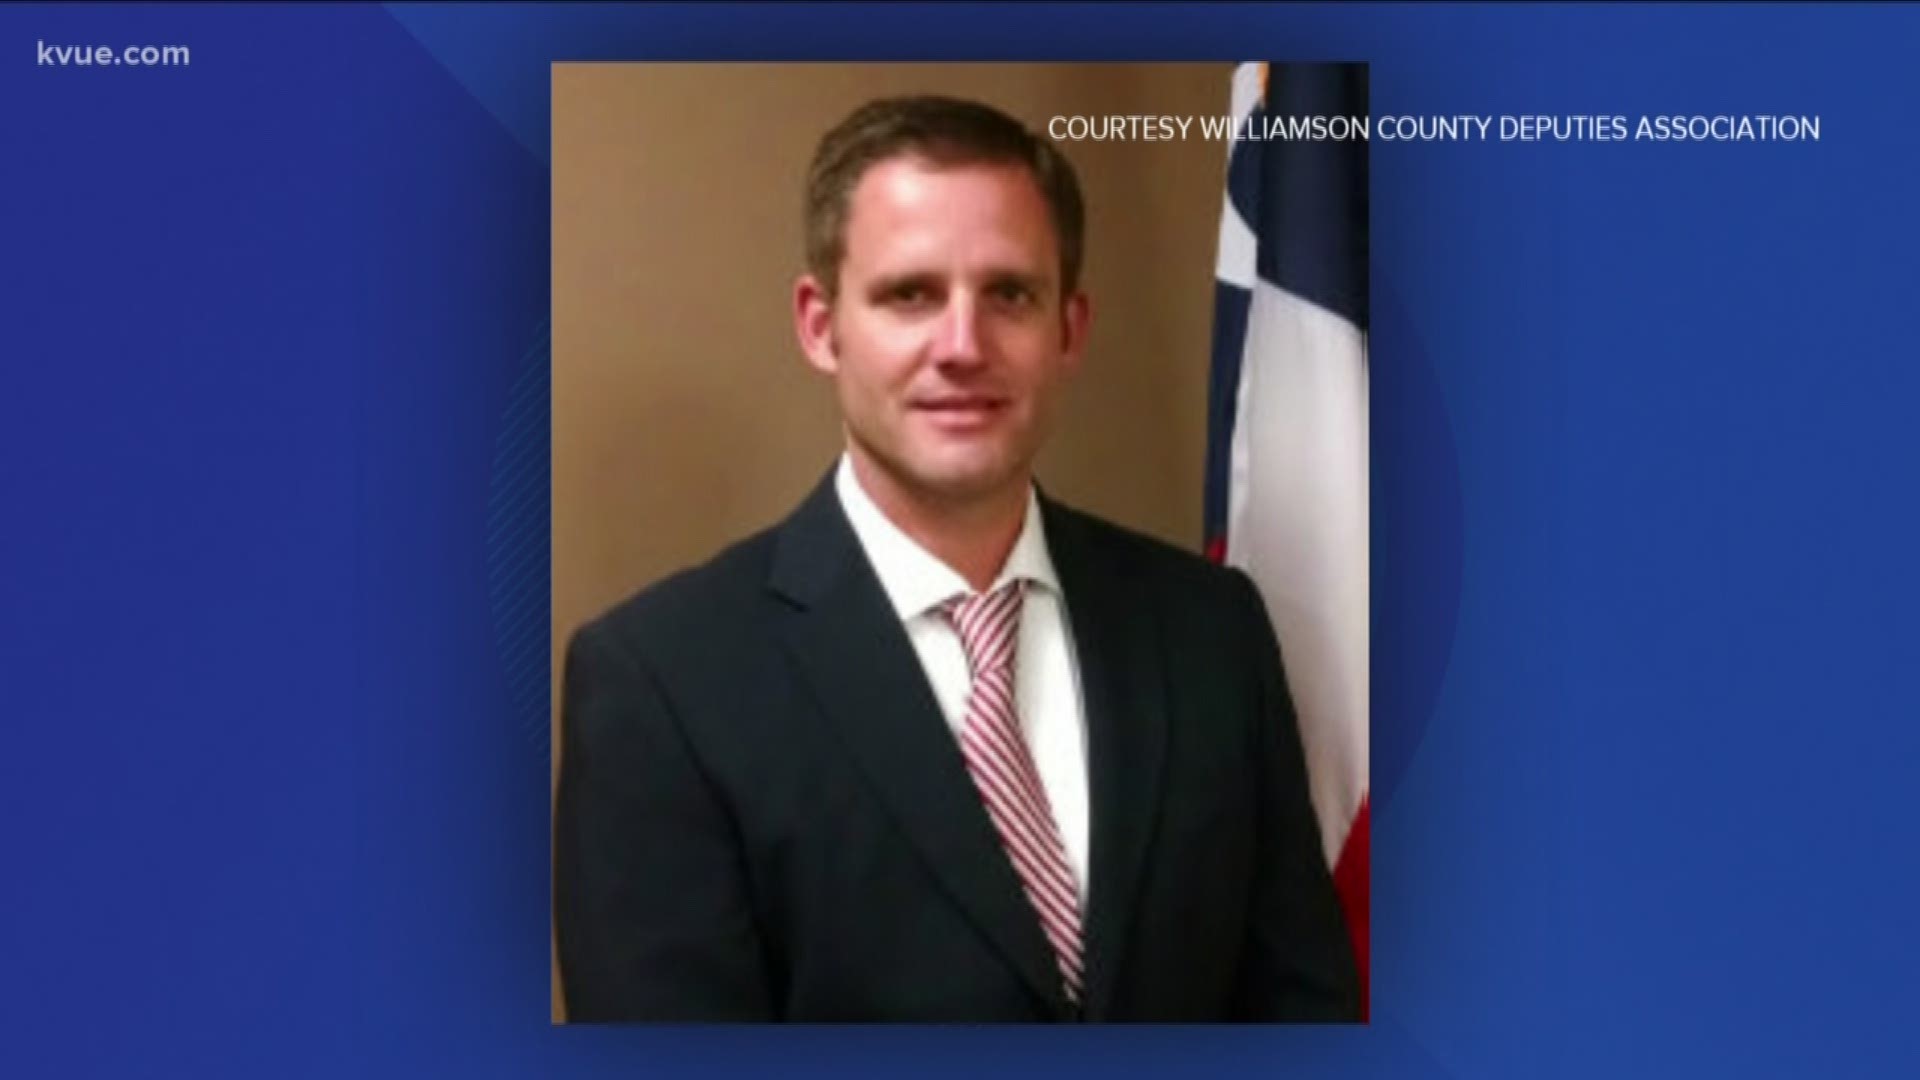 A former Williamson County detective said he was fired for whistleblowing.